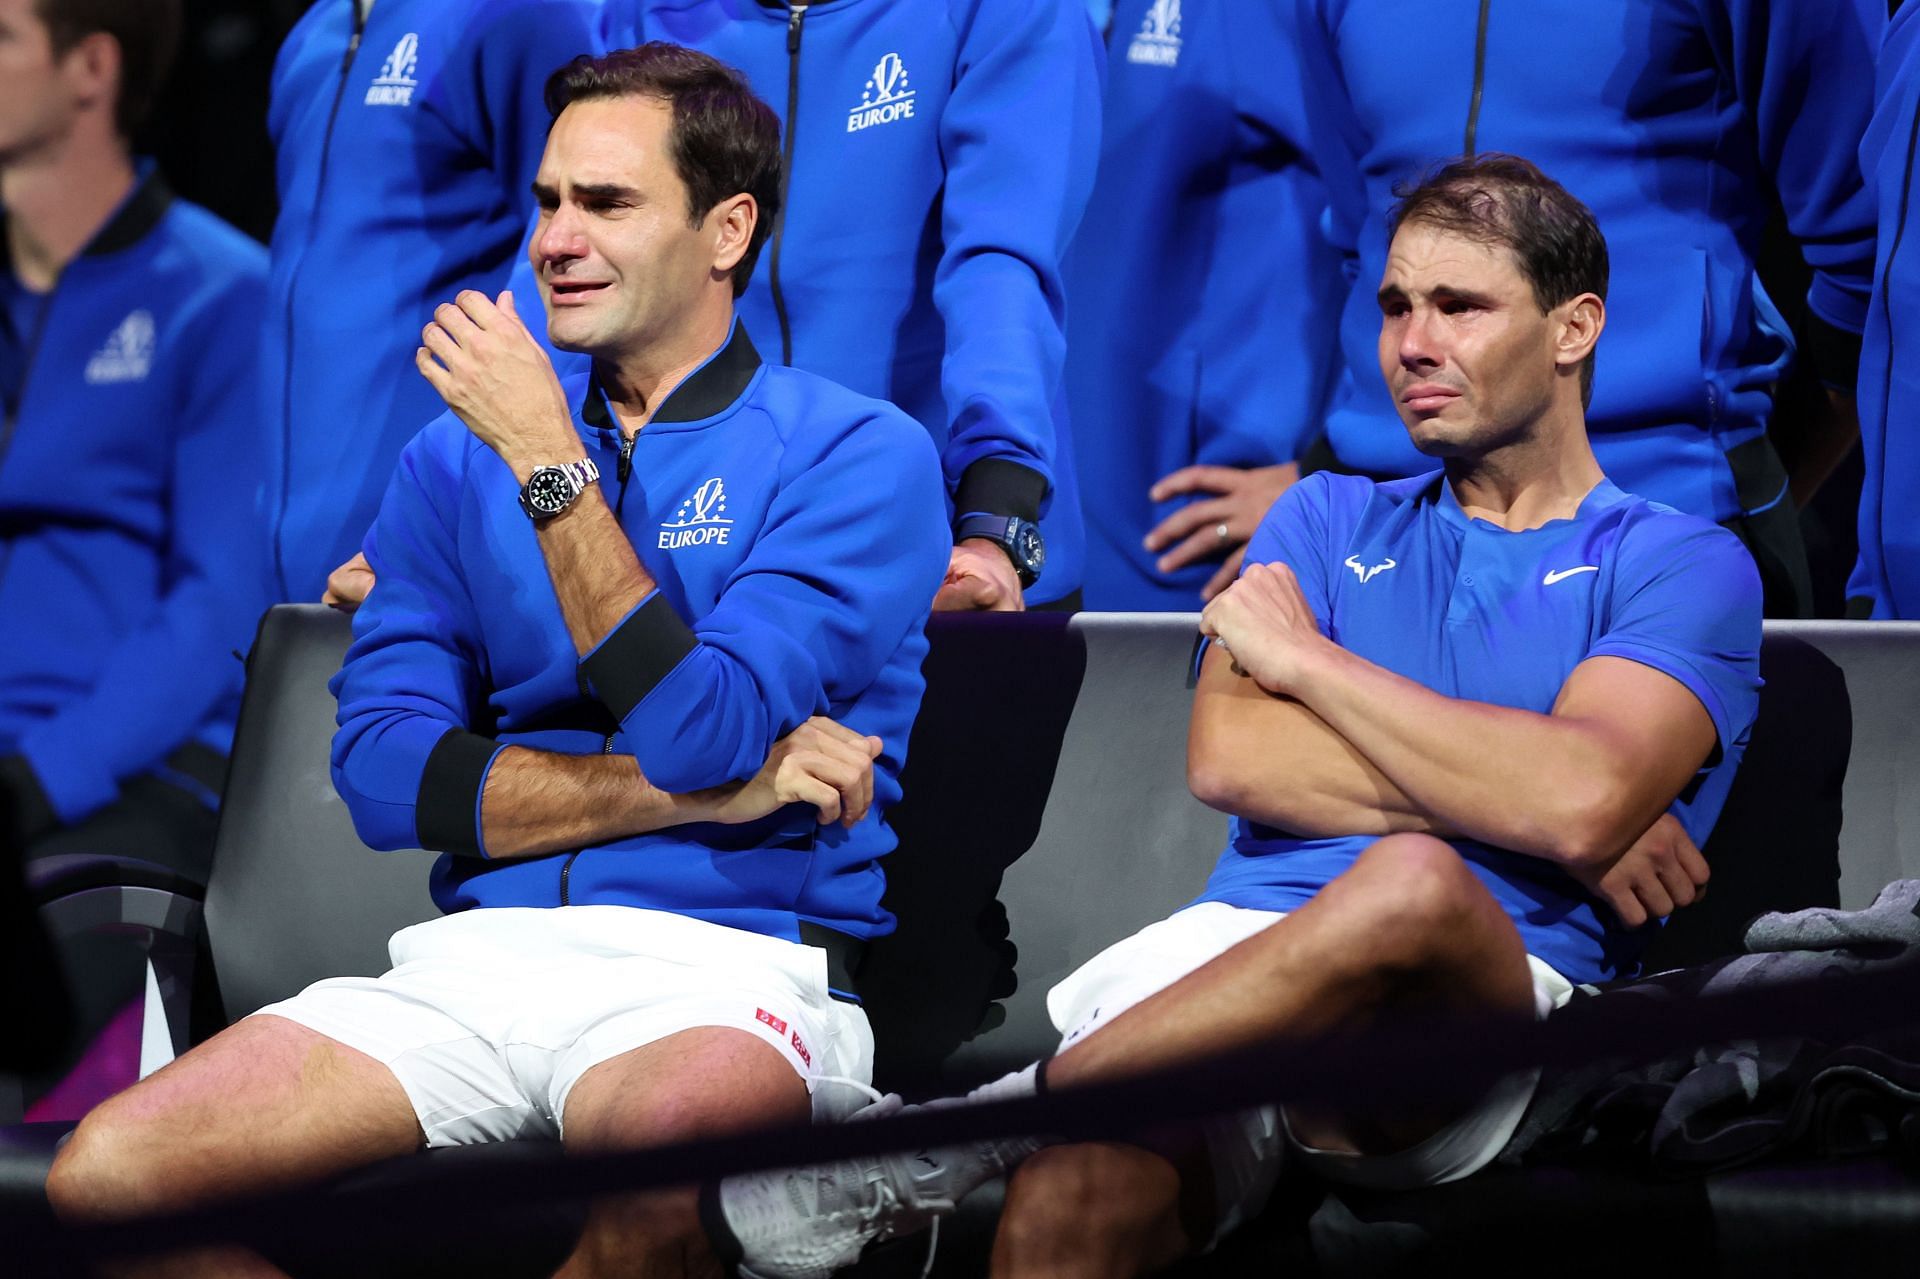 Roger Federer and Rafael Nadal following pictured at the 2022 Laver Cup.